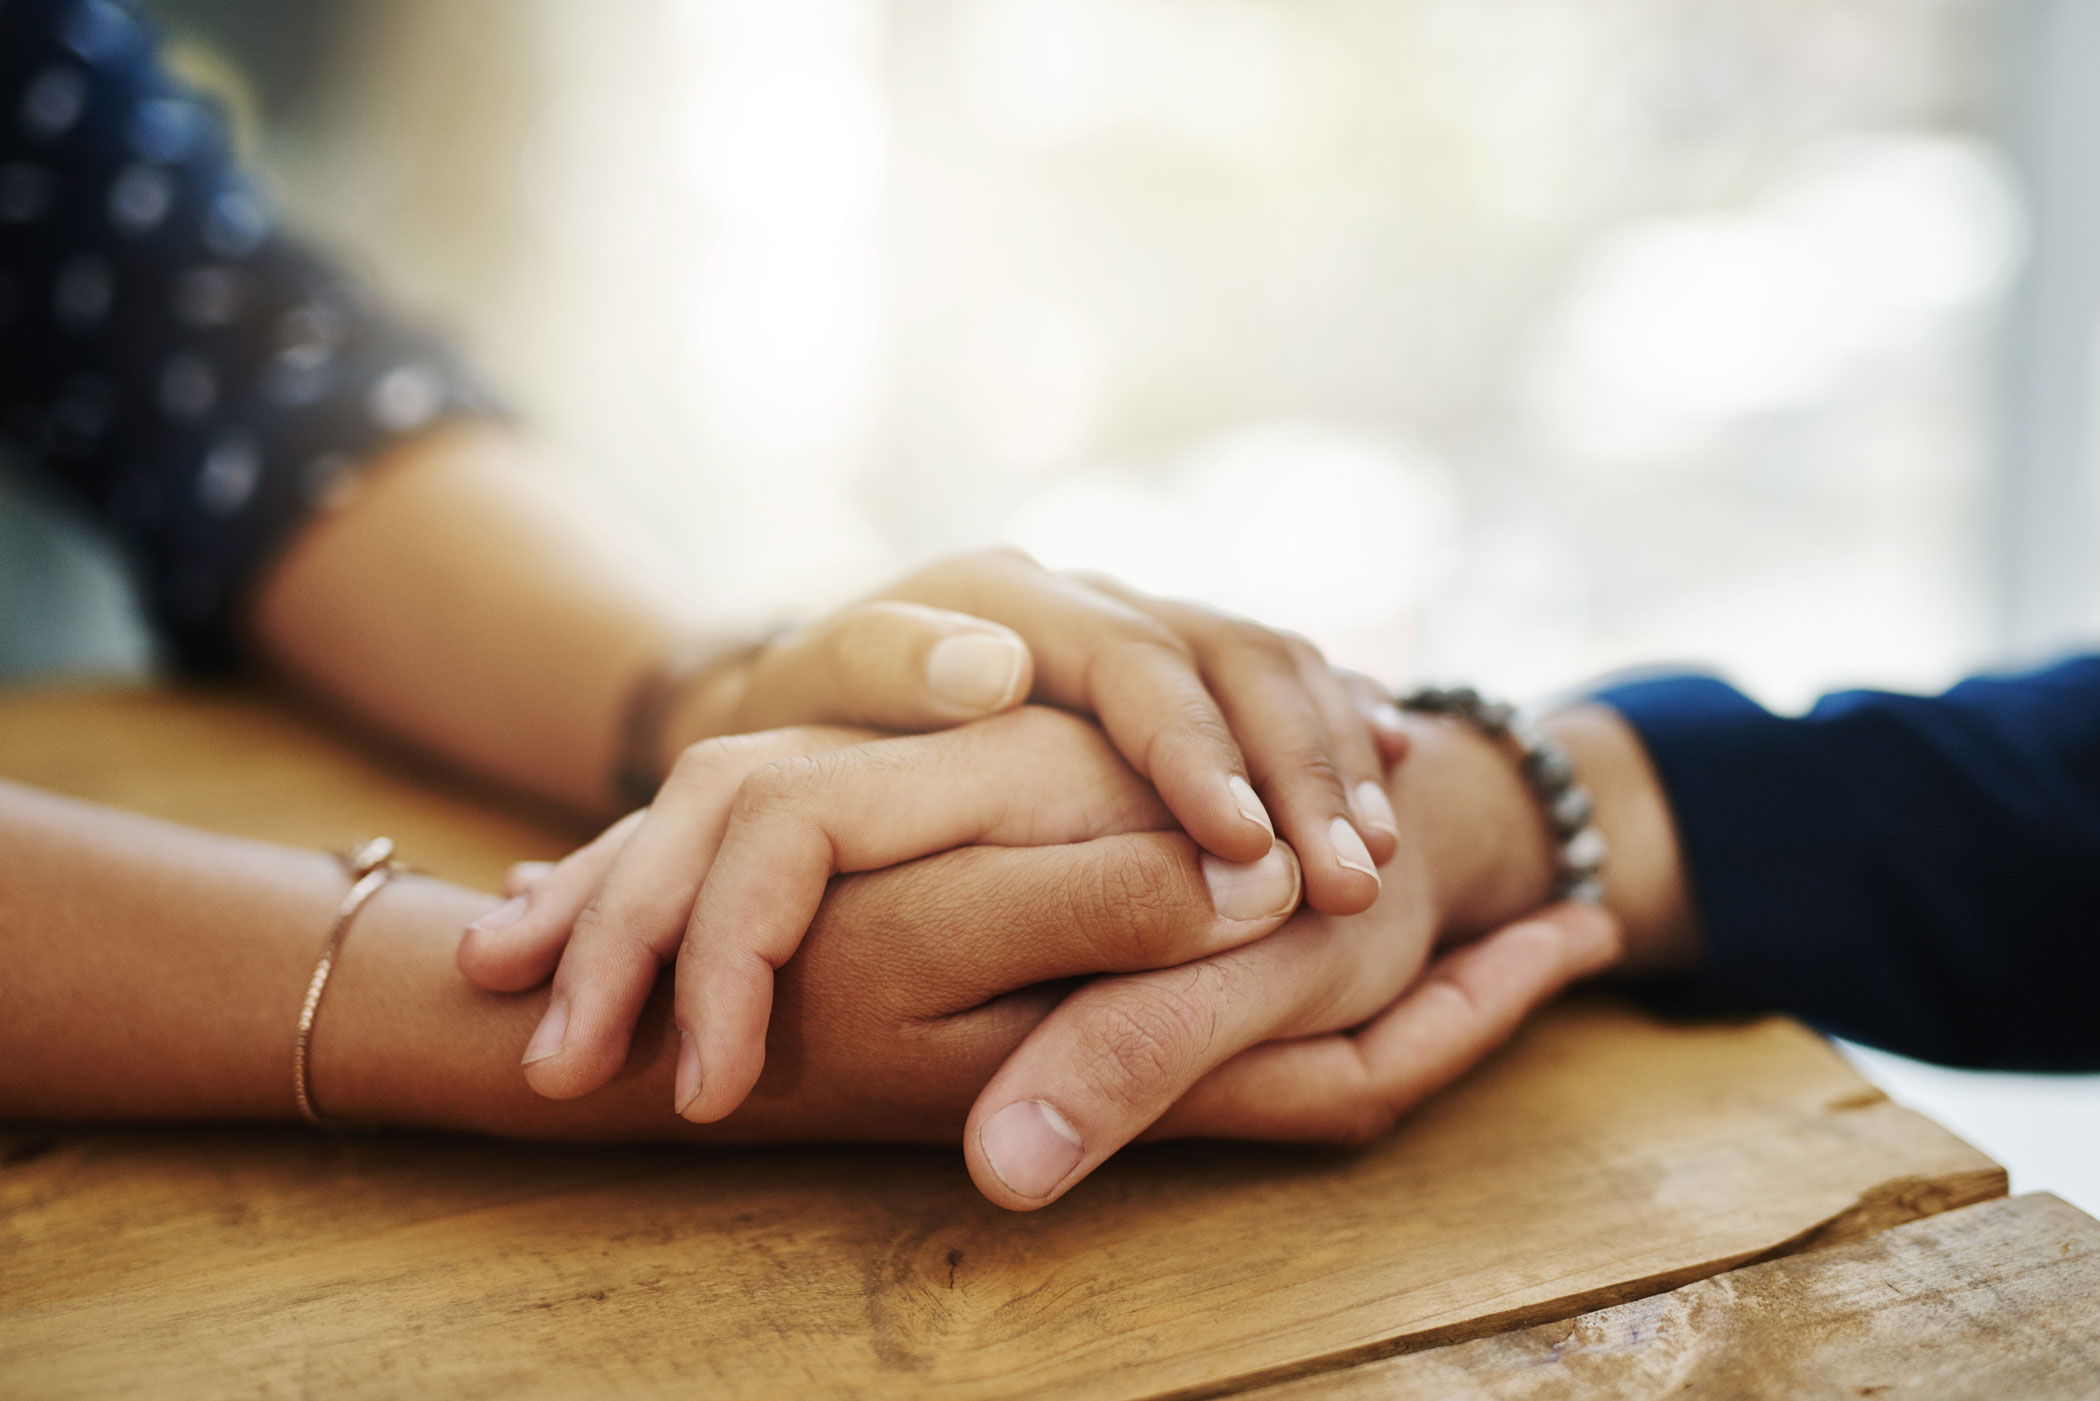 two people clasping hands to provide support to one another across a table, representative of trauma informed care